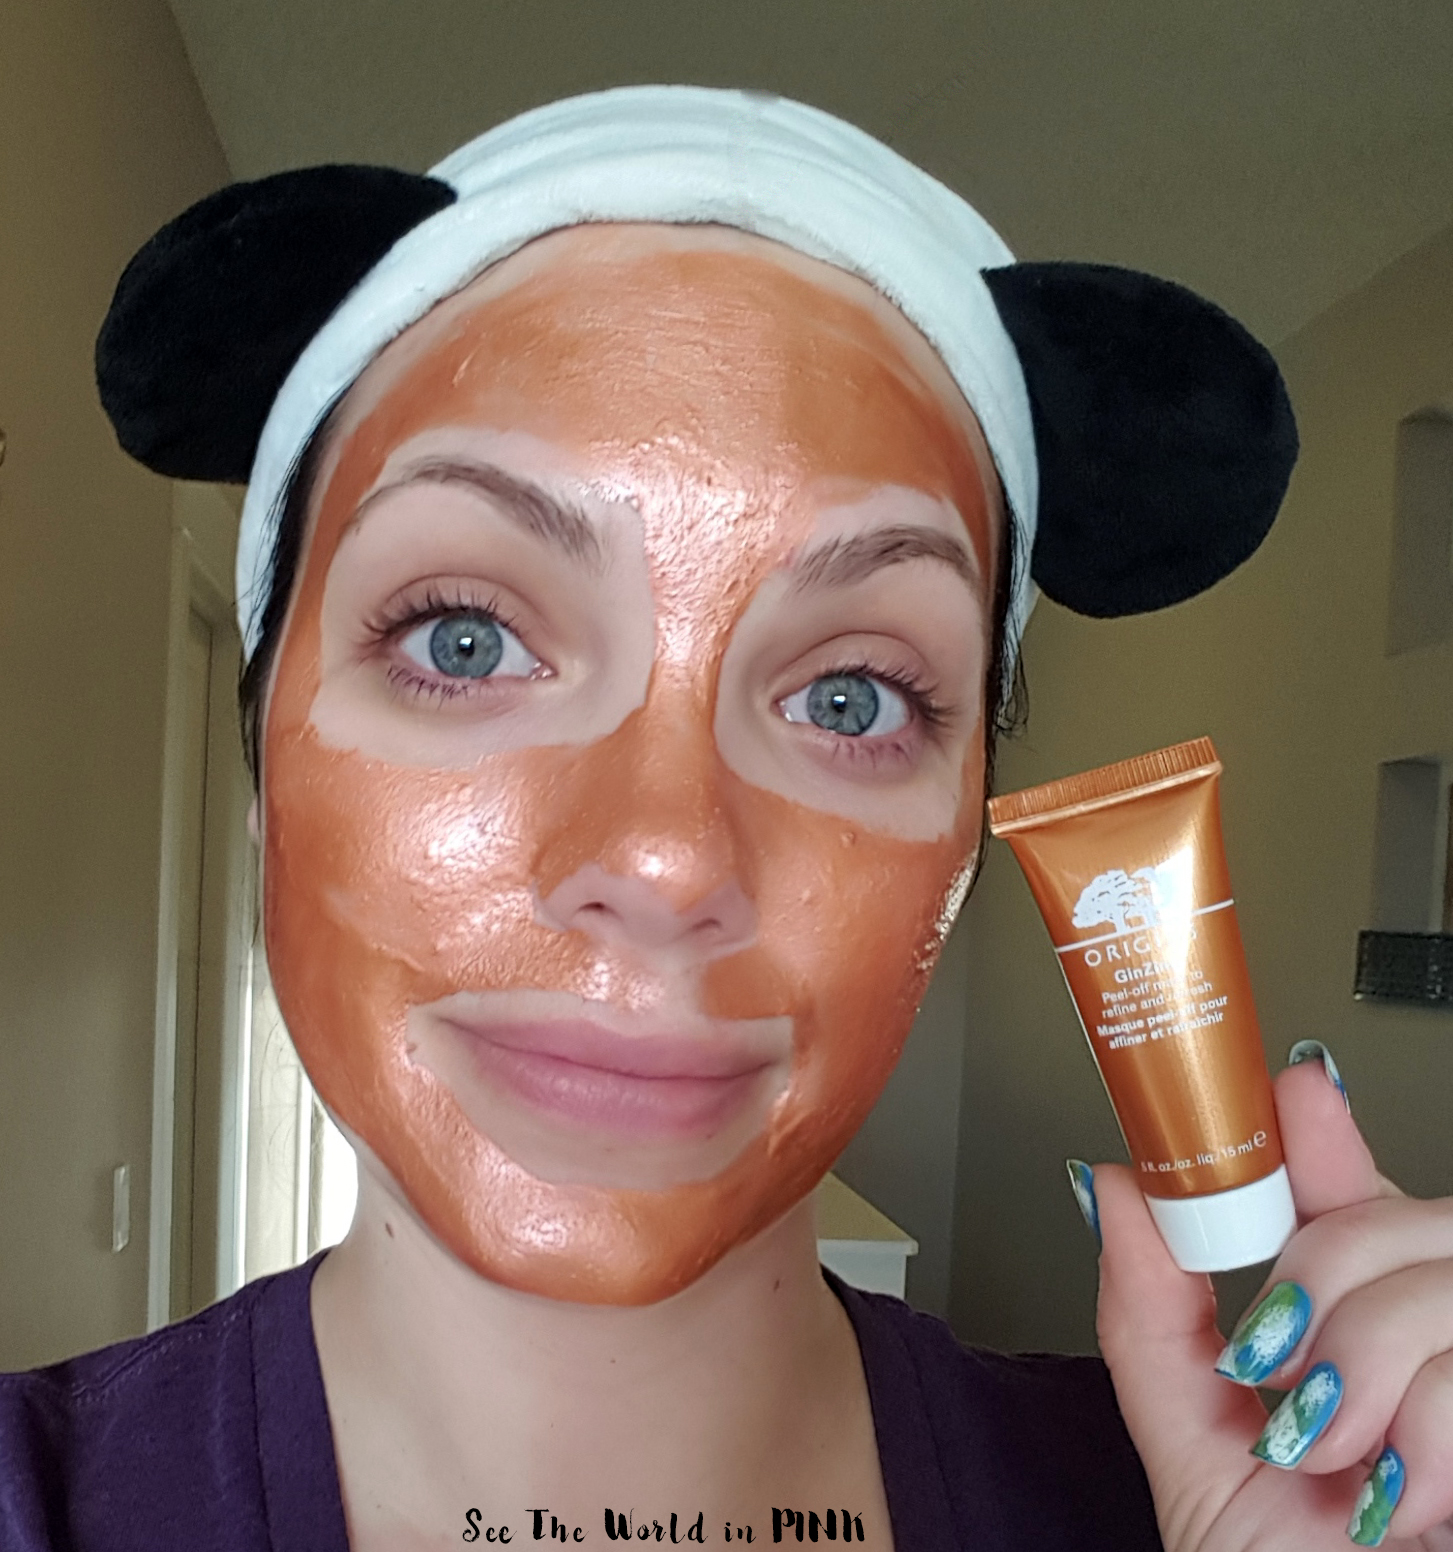 Delegeret Godkendelse Bibliografi Mask Wednesday - Origins GinZing Peel-Off Mask to Refine and Refresh Try-on  and Review! | See the World in PINK